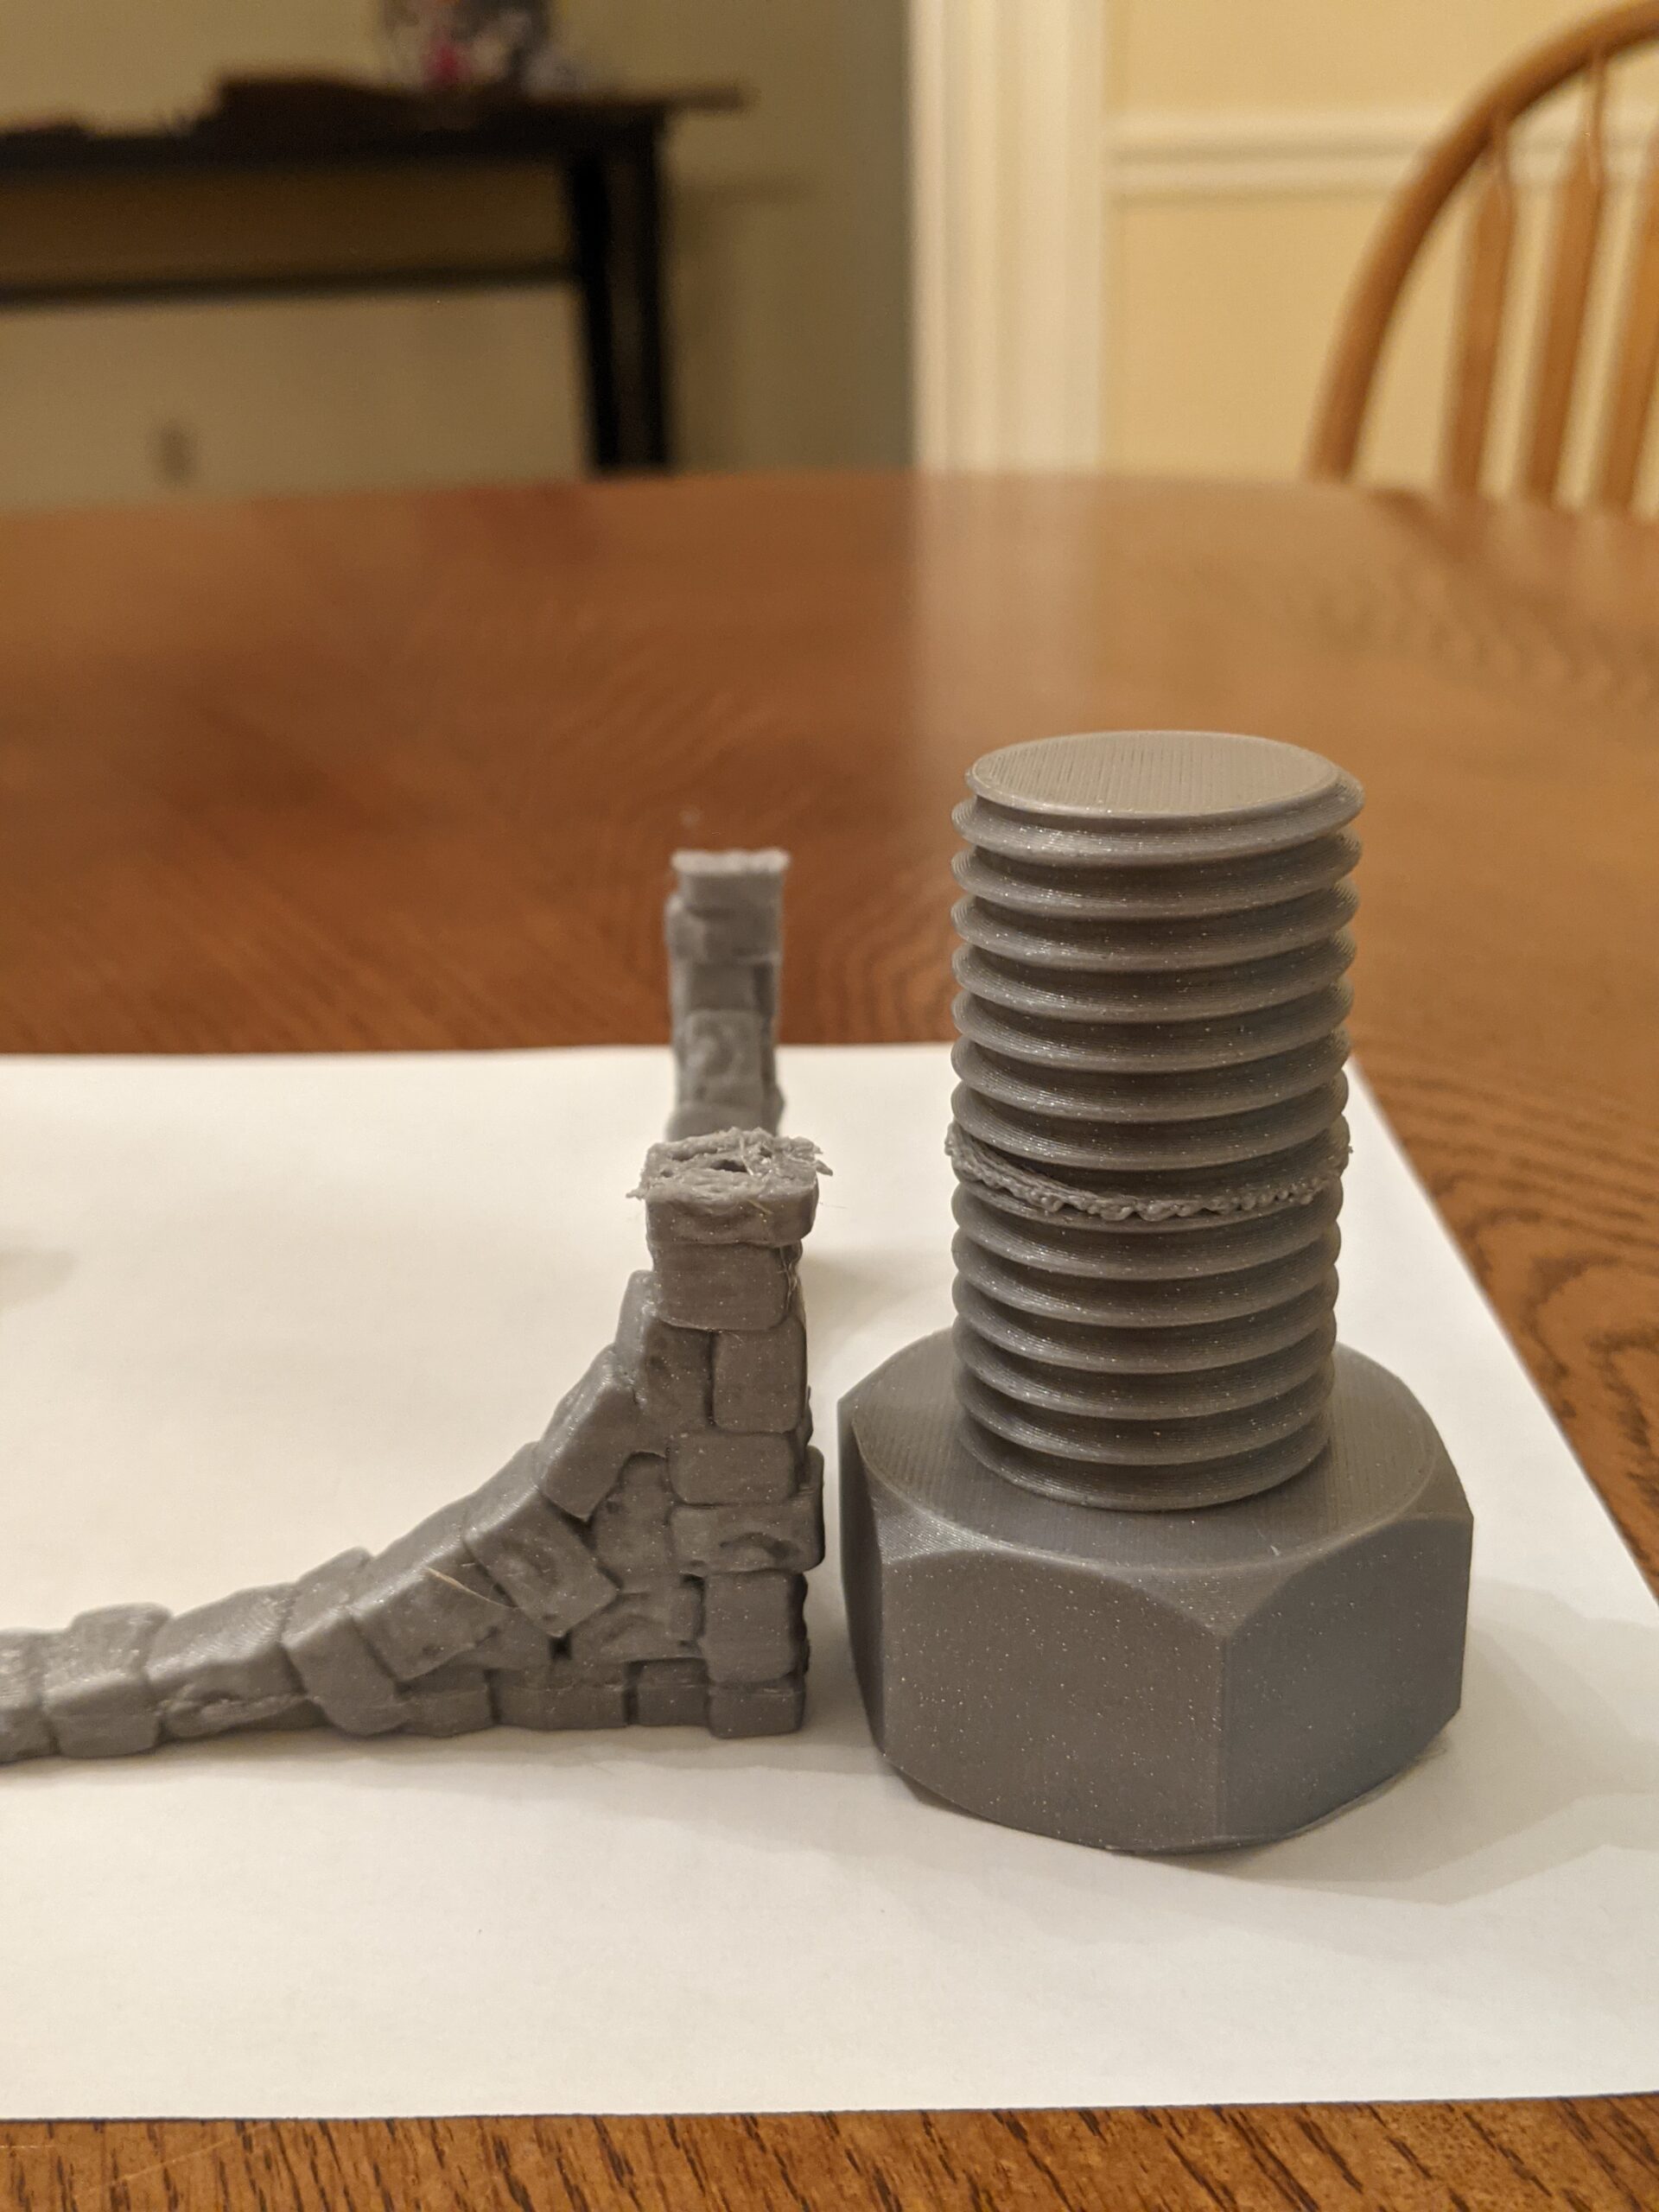 help with polyterra pla – Assembly and first prints troubleshooting –  Prusa3D Forum